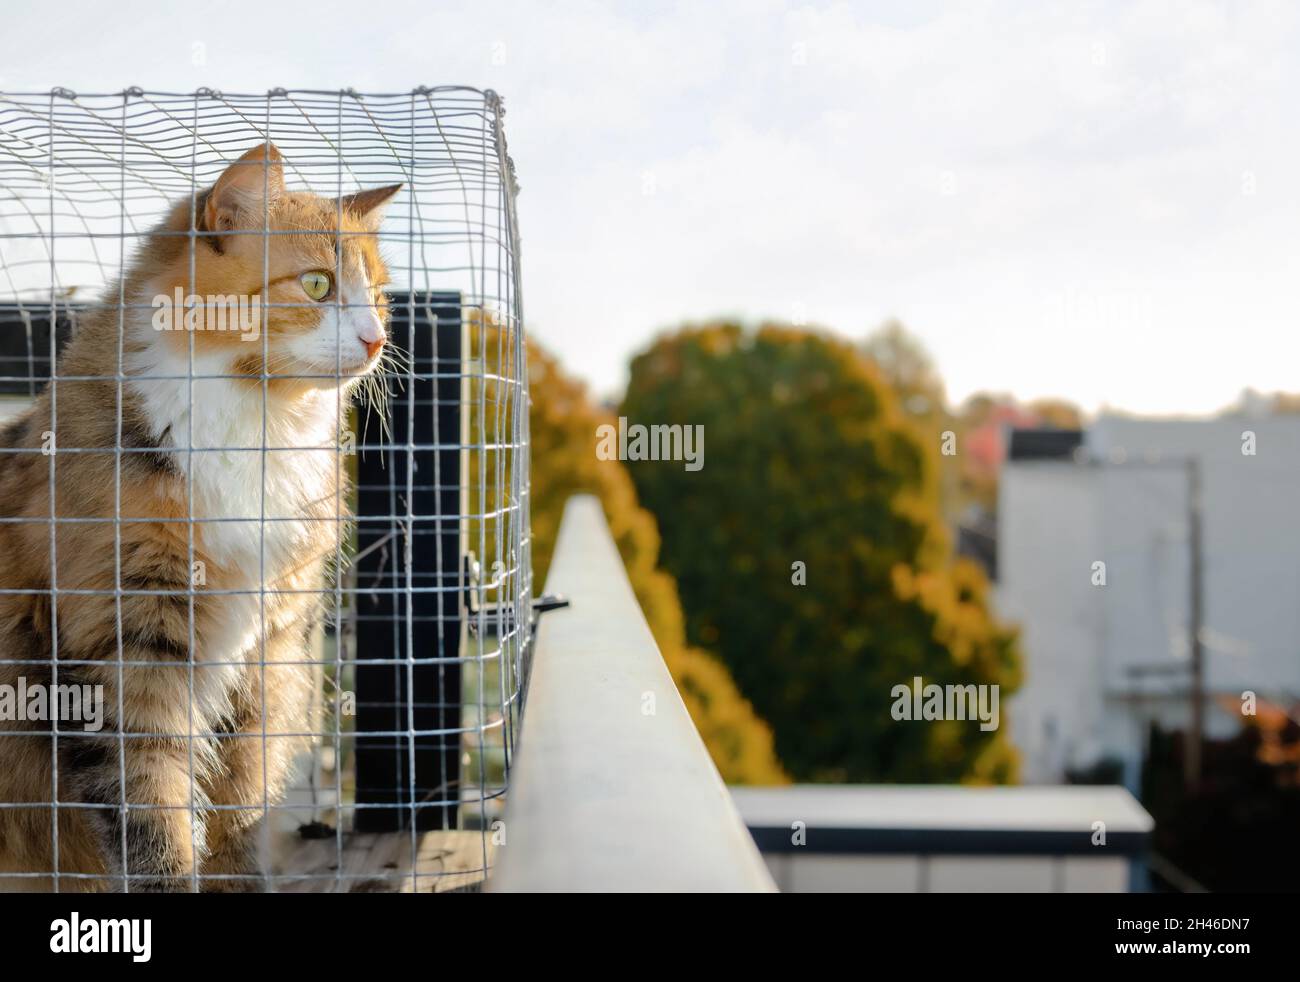 Cat sitting in catio or cat outdoor enclosure while looking at something interested. Cat is inside a chicken wire box on rooftop patio of building Stock Photo